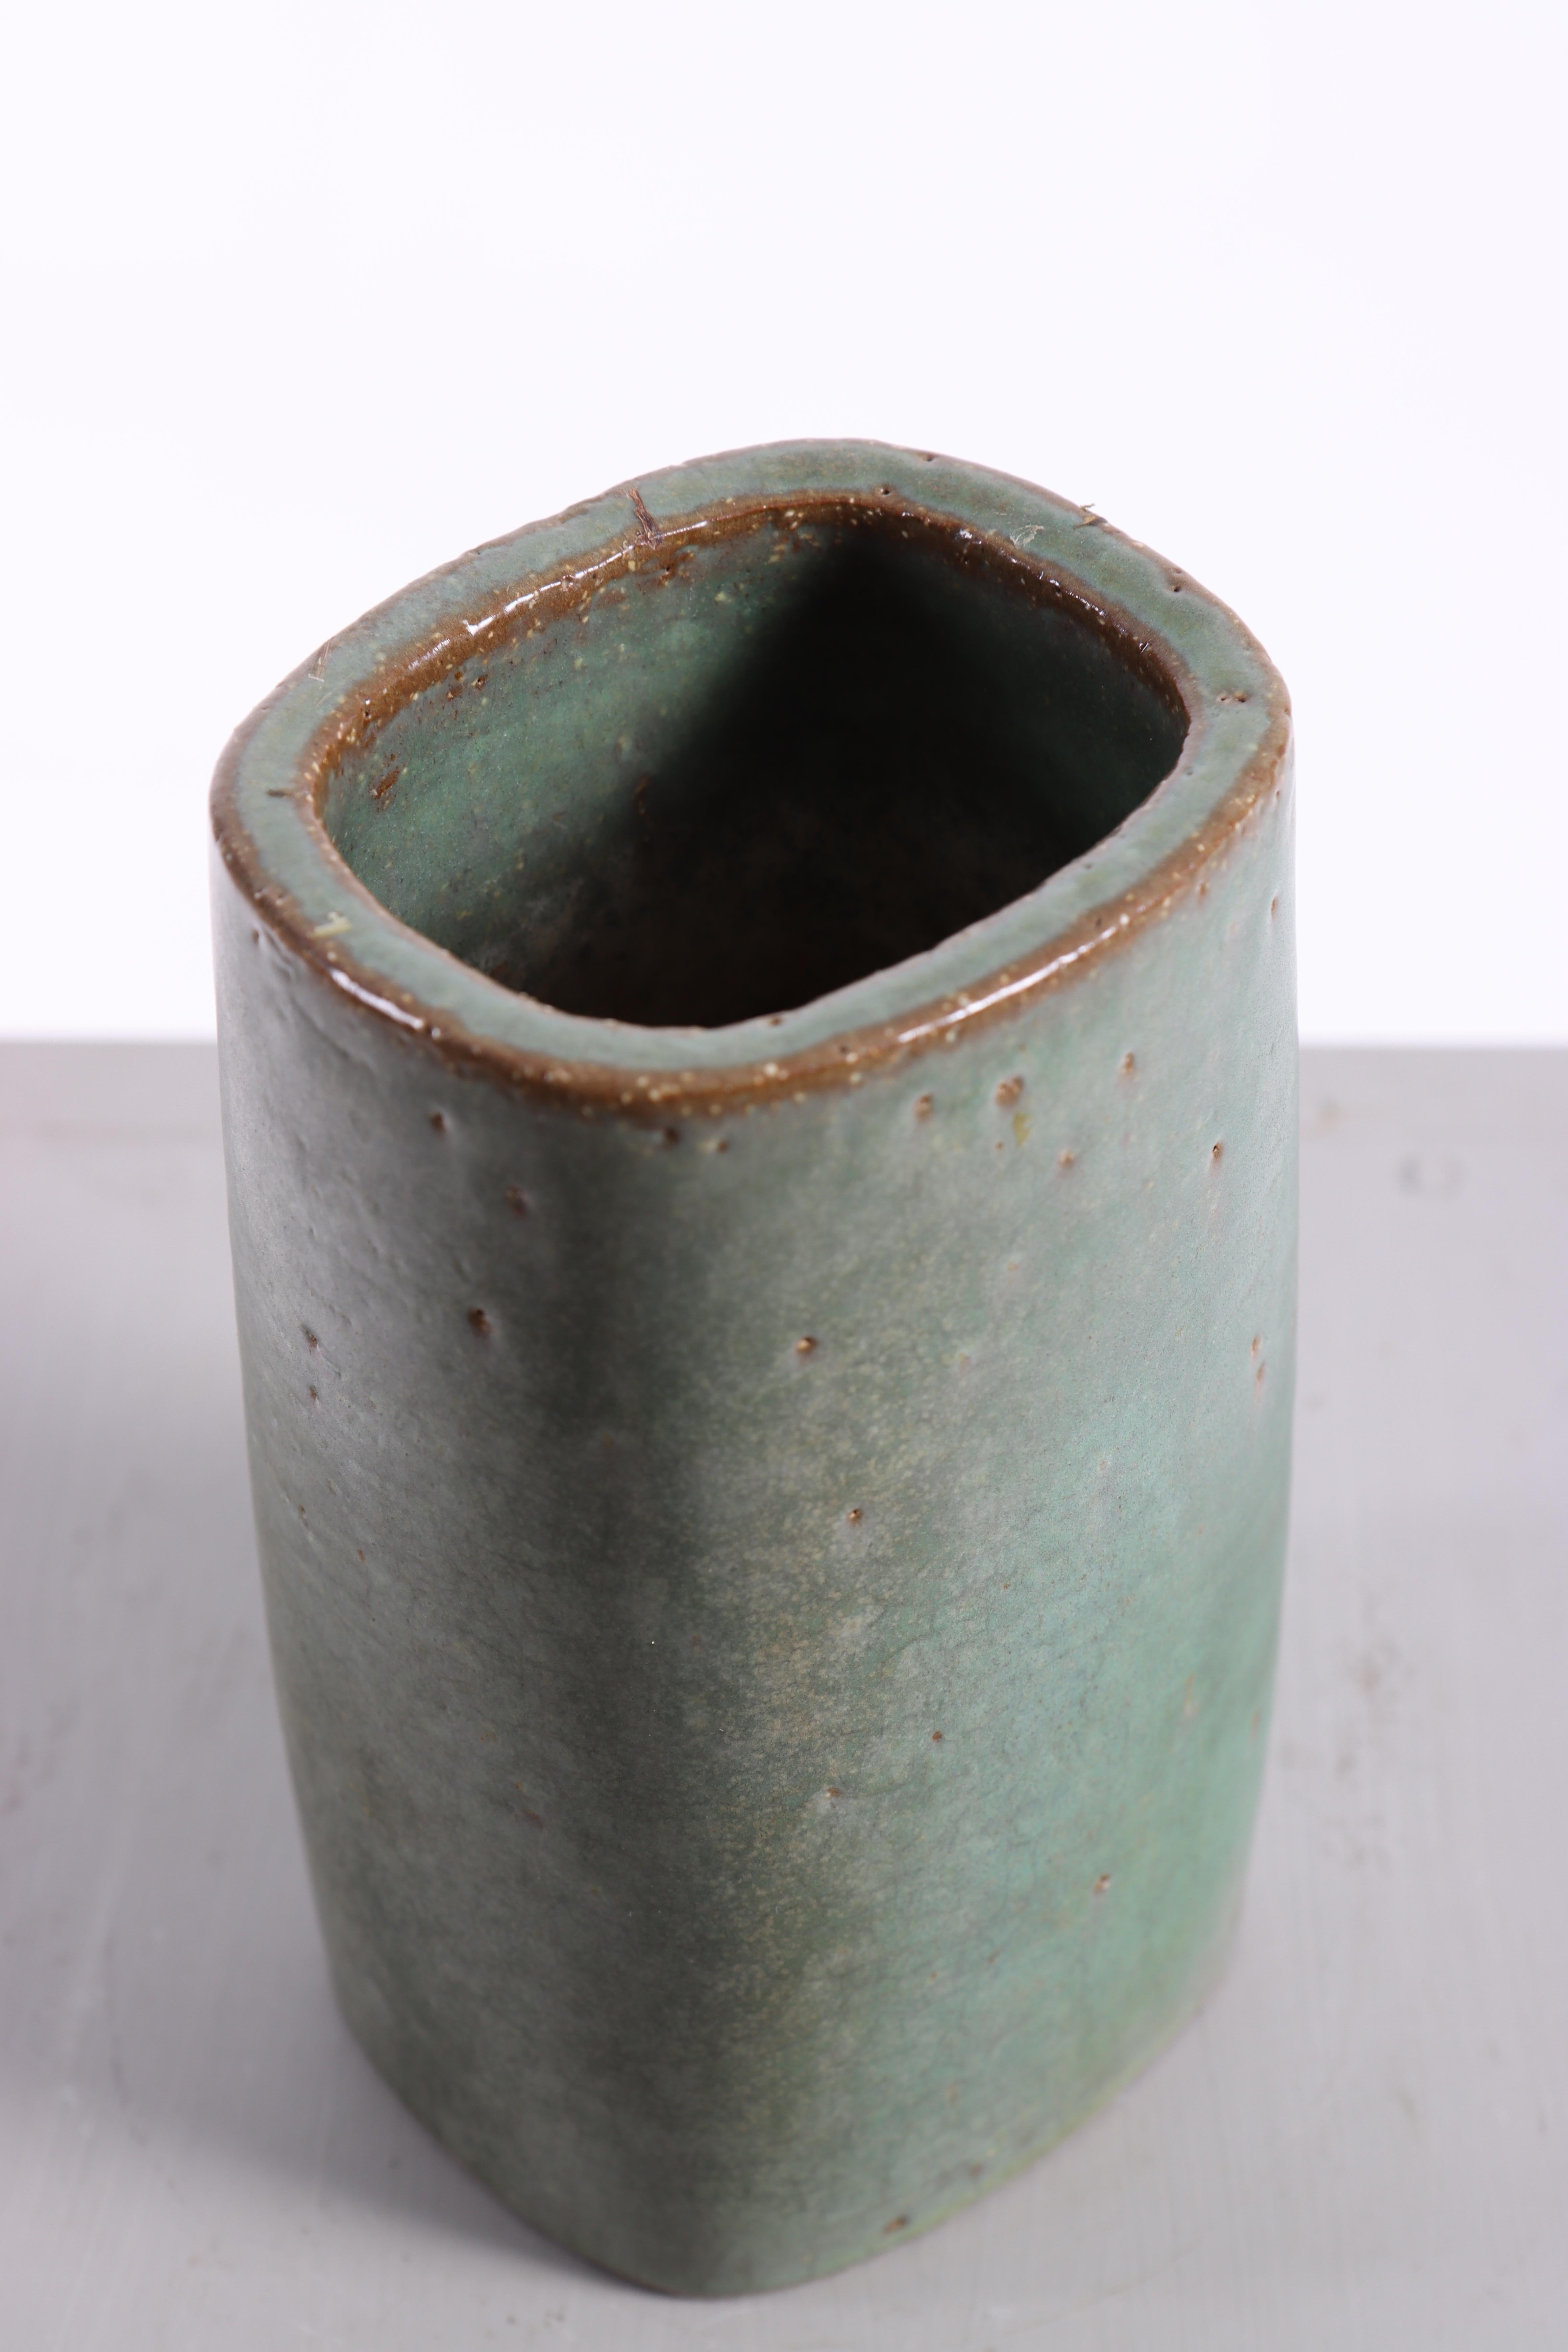 Decorative ceramic vase designed by Per Linnemann Schmidt and made by Palshus, made in Denmark in the 1960s. Great original condition.